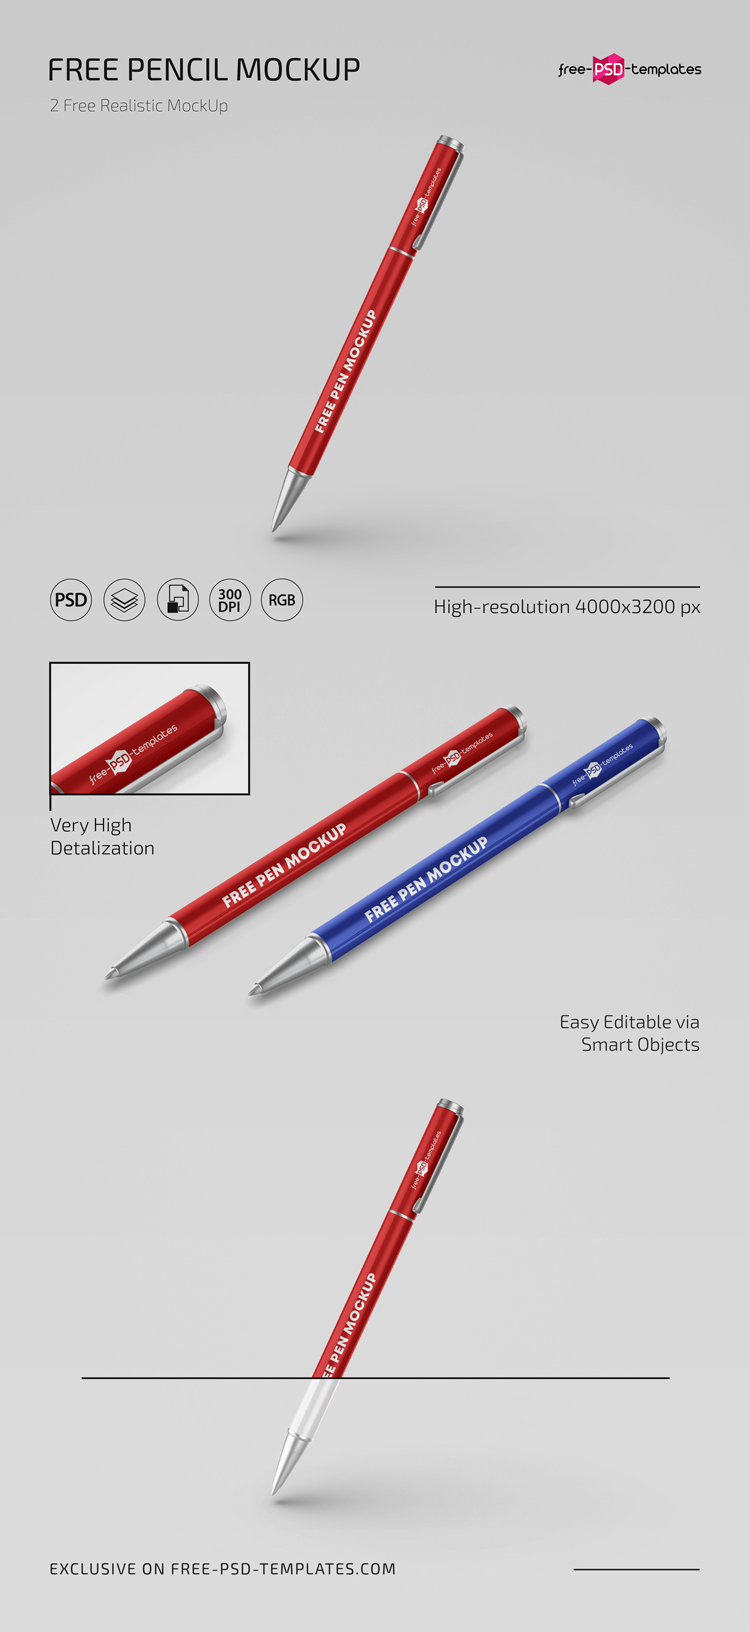 Download Free Pencil Mockup Template in PSD | Free PSD Templates